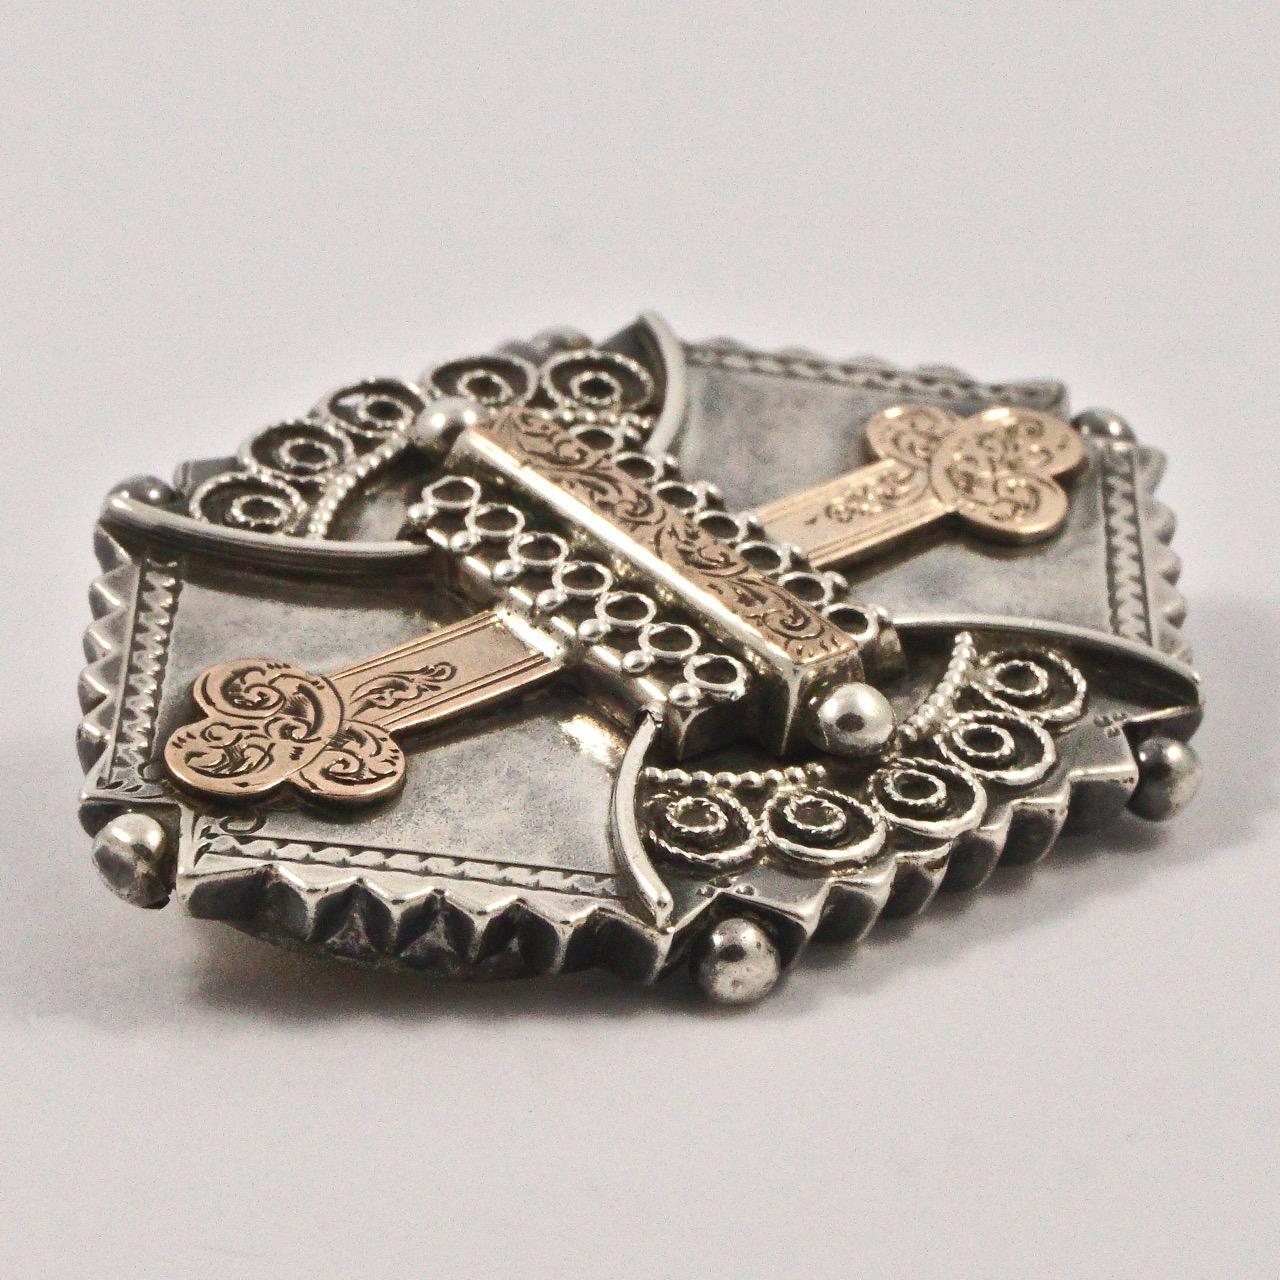 Antique Victorian Sterling Silver and Rose Gold Ornate Engraved Brooch For Sale 2